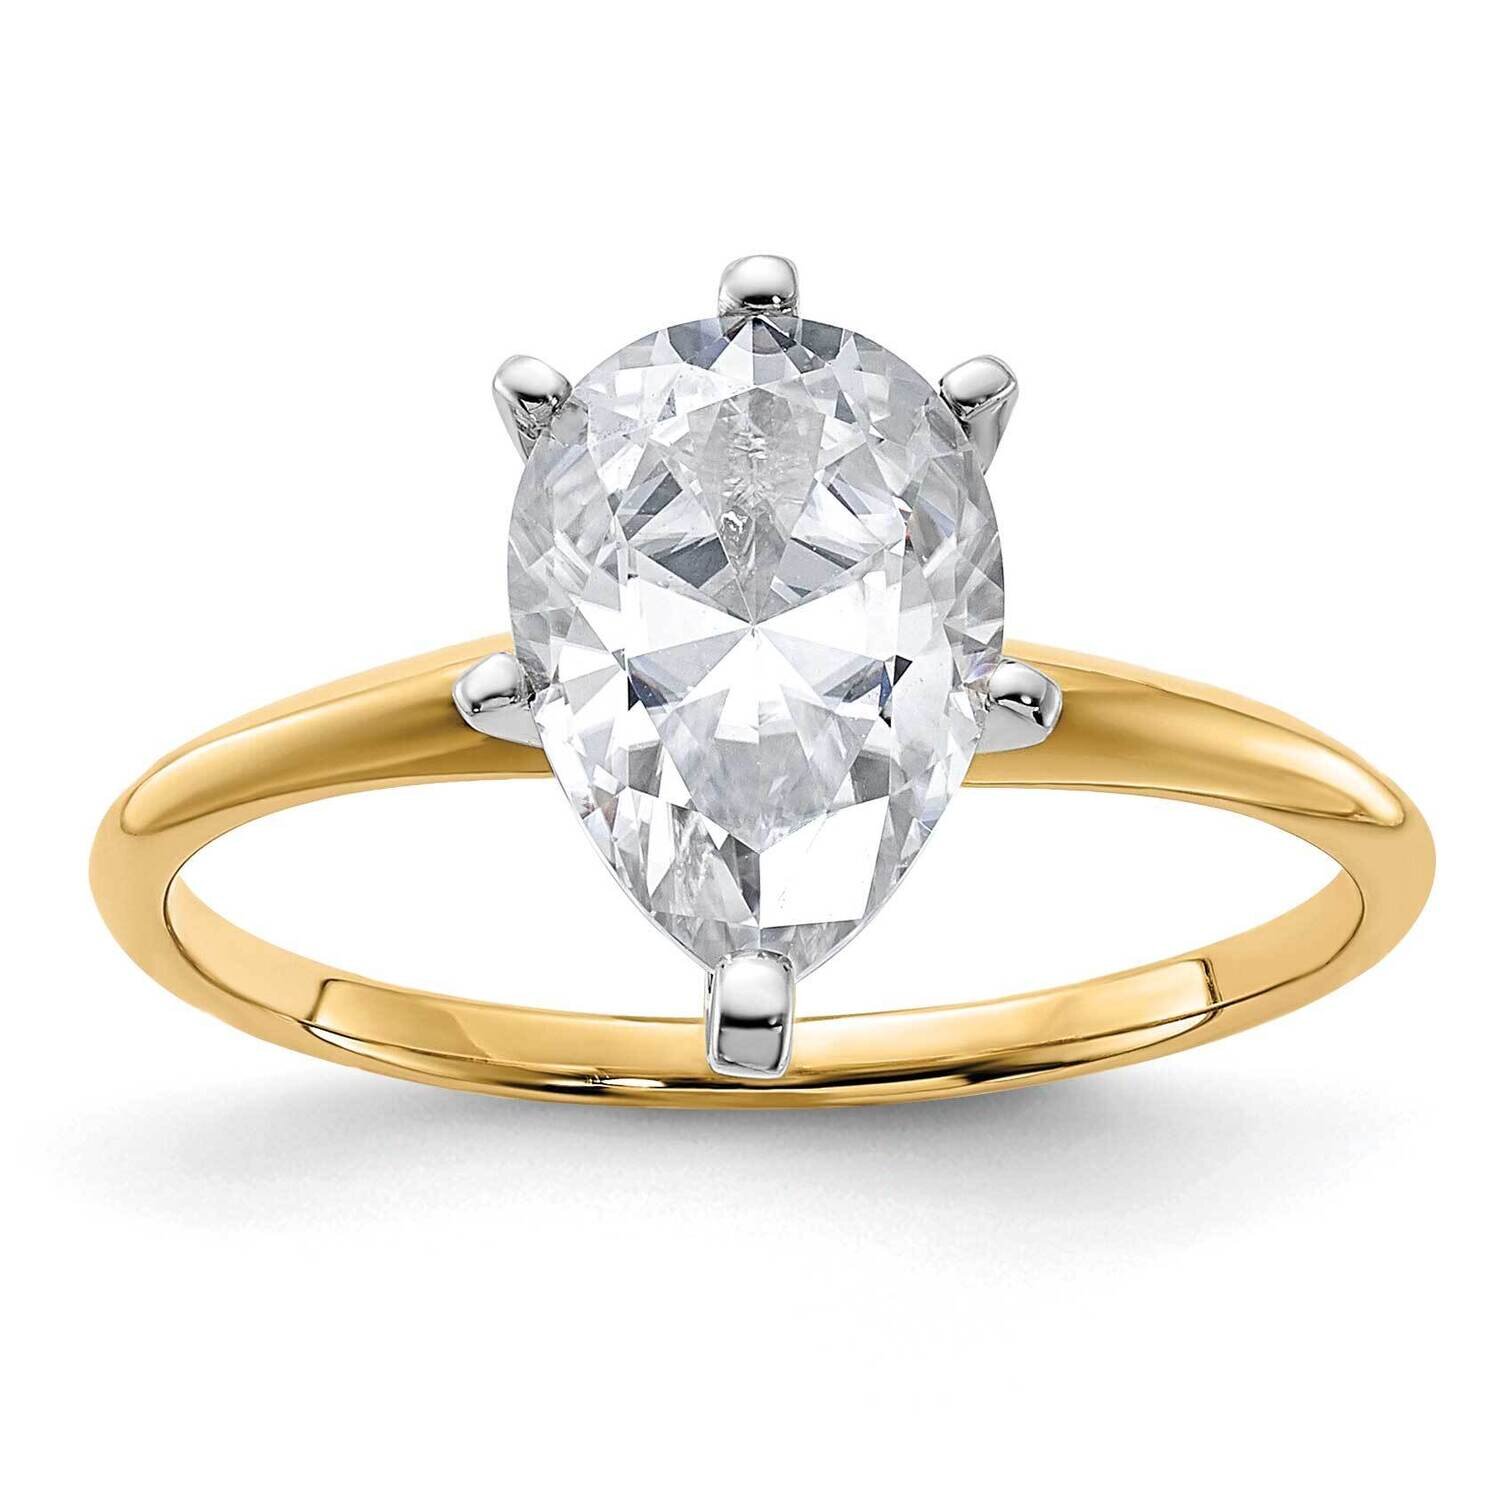 2ct. G H I True Light Pear Moissanite Solitaire Ring 14k Gold YGSH15A-15MT